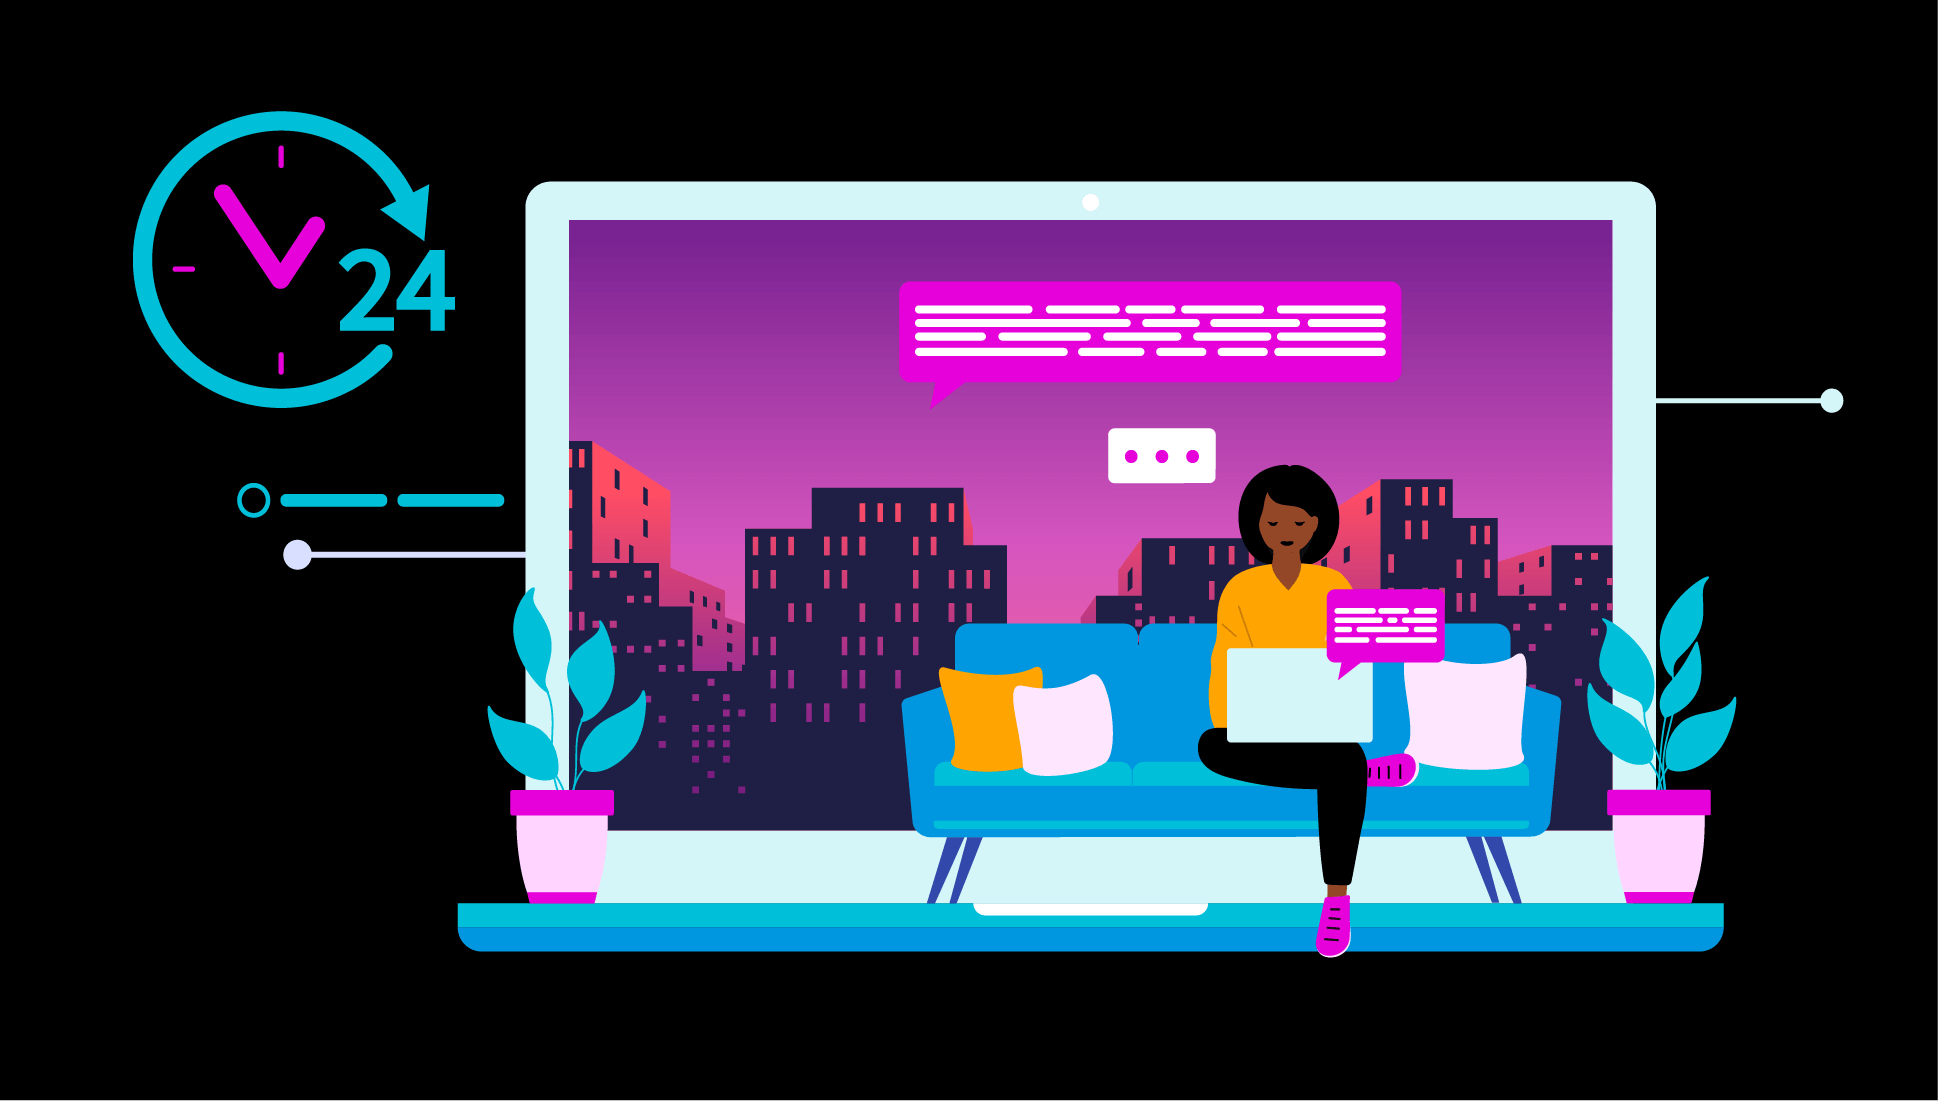 Illustration/image of someone using a chatbot/virtual assistant at night